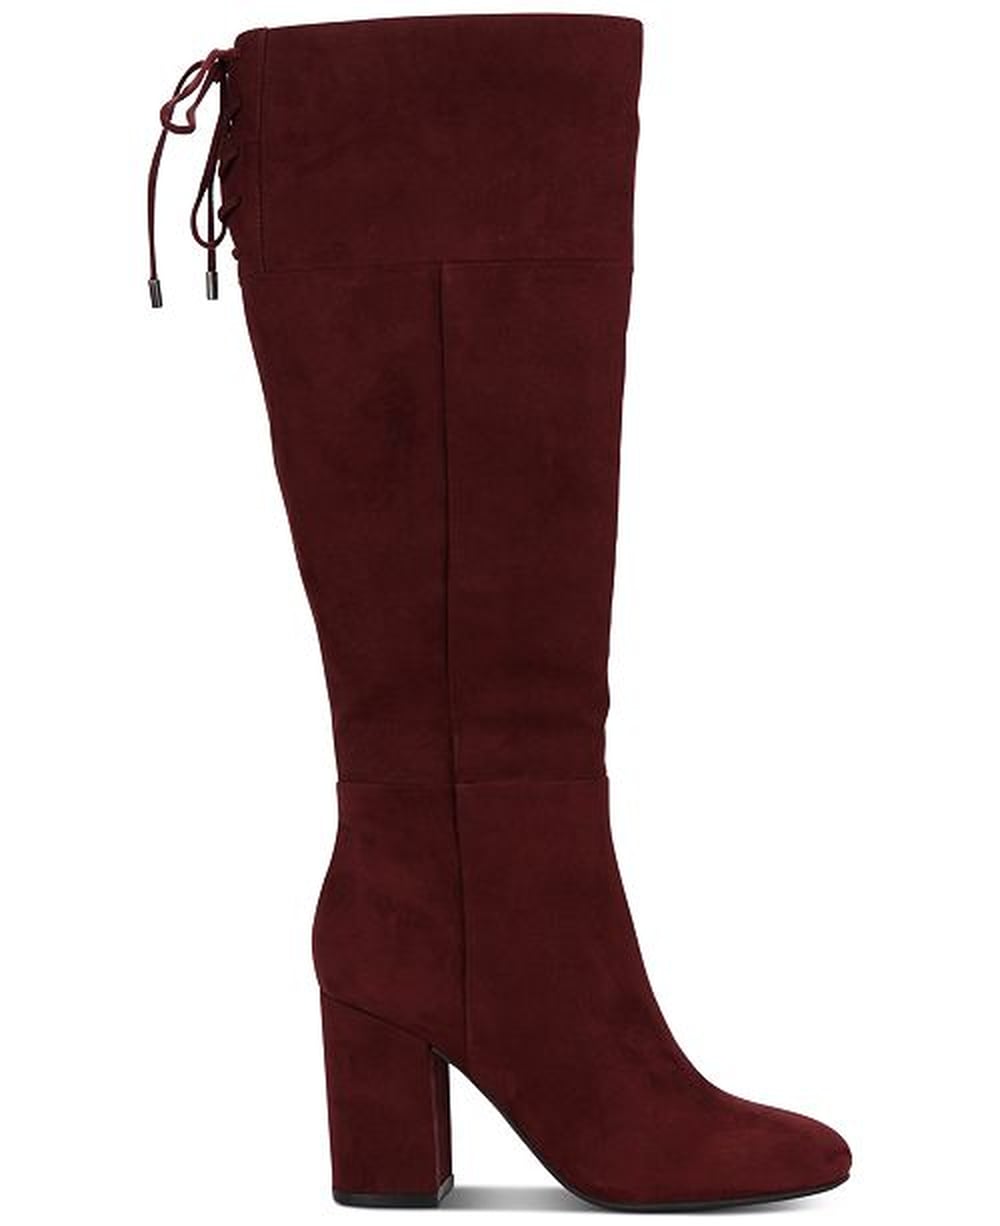 These Are the Best Knee-High Boots at Macy's | POPSUGAR Fashion